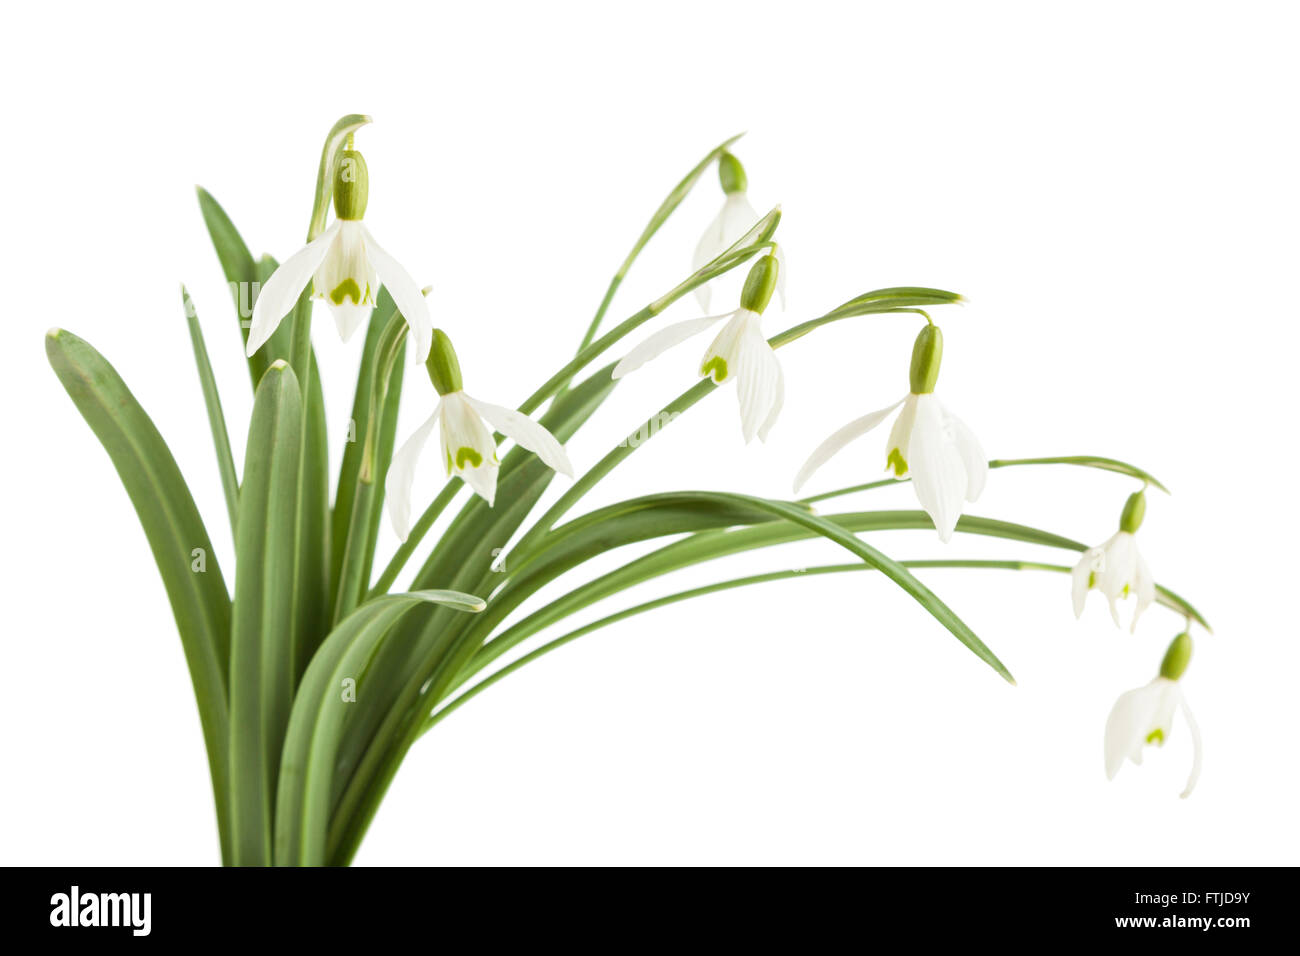 Bunch of snowdrops flowers on white background Stock Photo